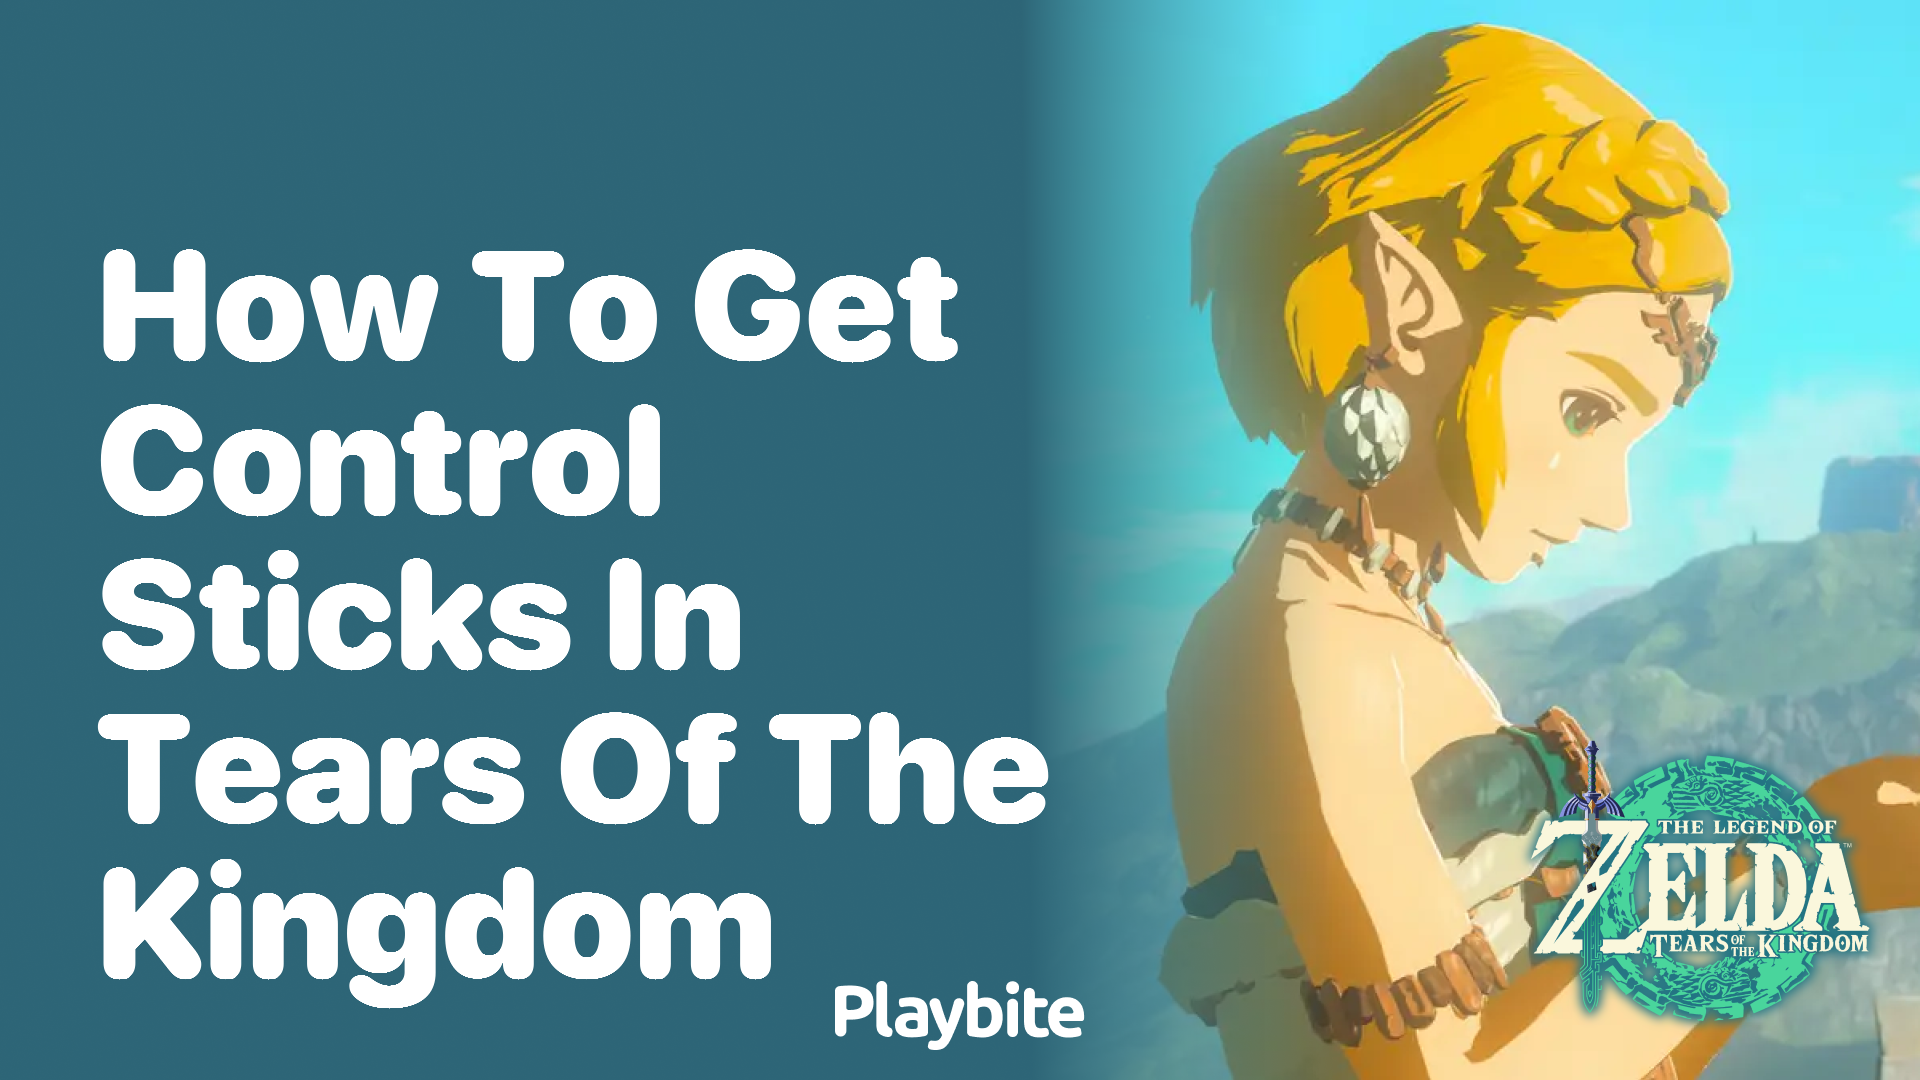 How to Get Control Sticks in Tears of the Kingdom